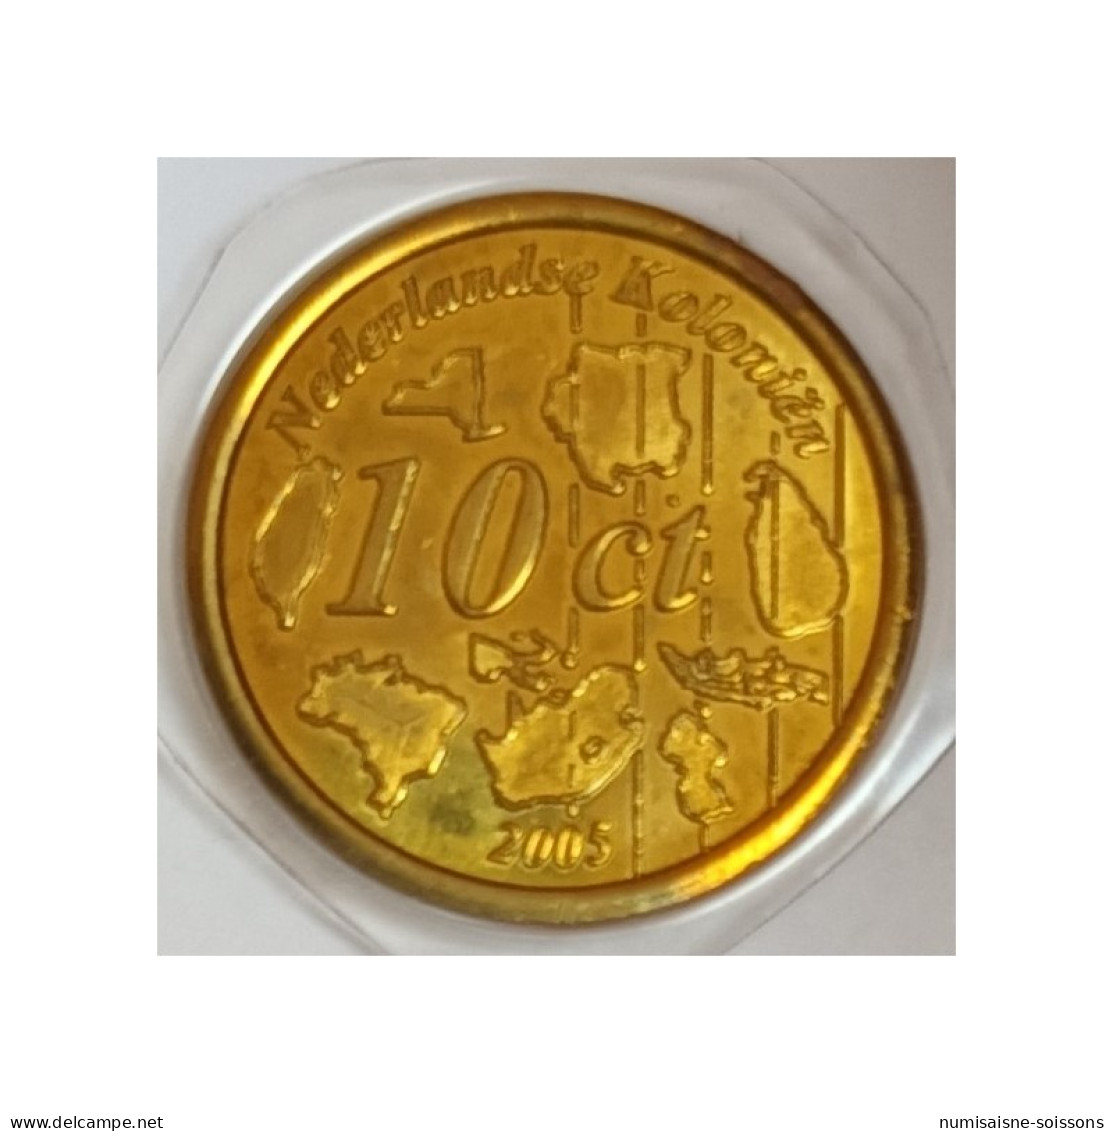 INDONESIE - 10 CENT PROTOTYPE 2005 - SPL - Private Proofs / Unofficial